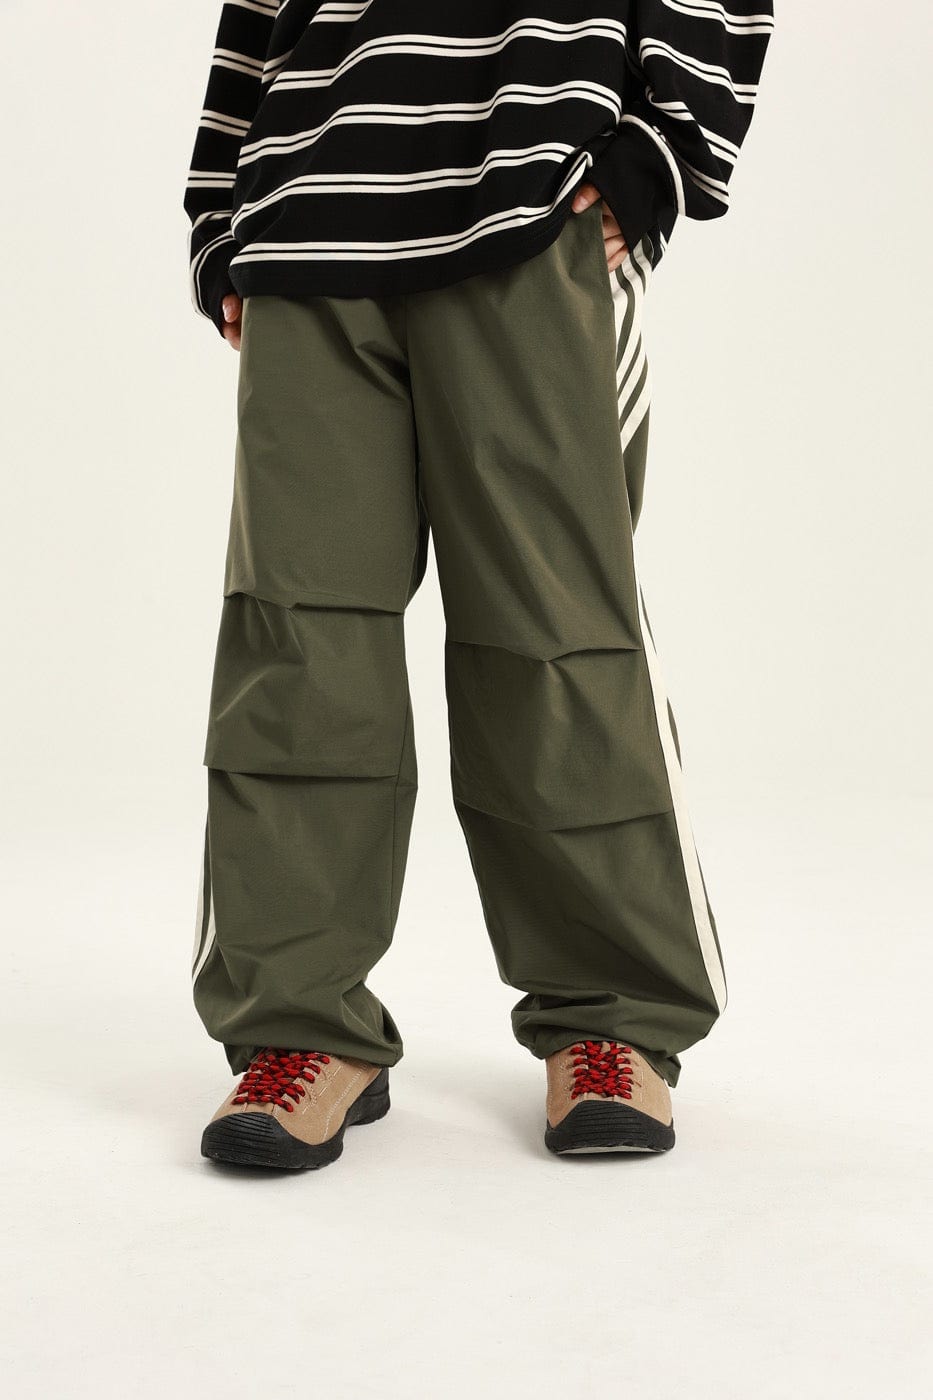 CONKLAB Side Stripes Crinkled Pants, premium urban and streetwear designers apparel on PROJECTISR.com, Conklab